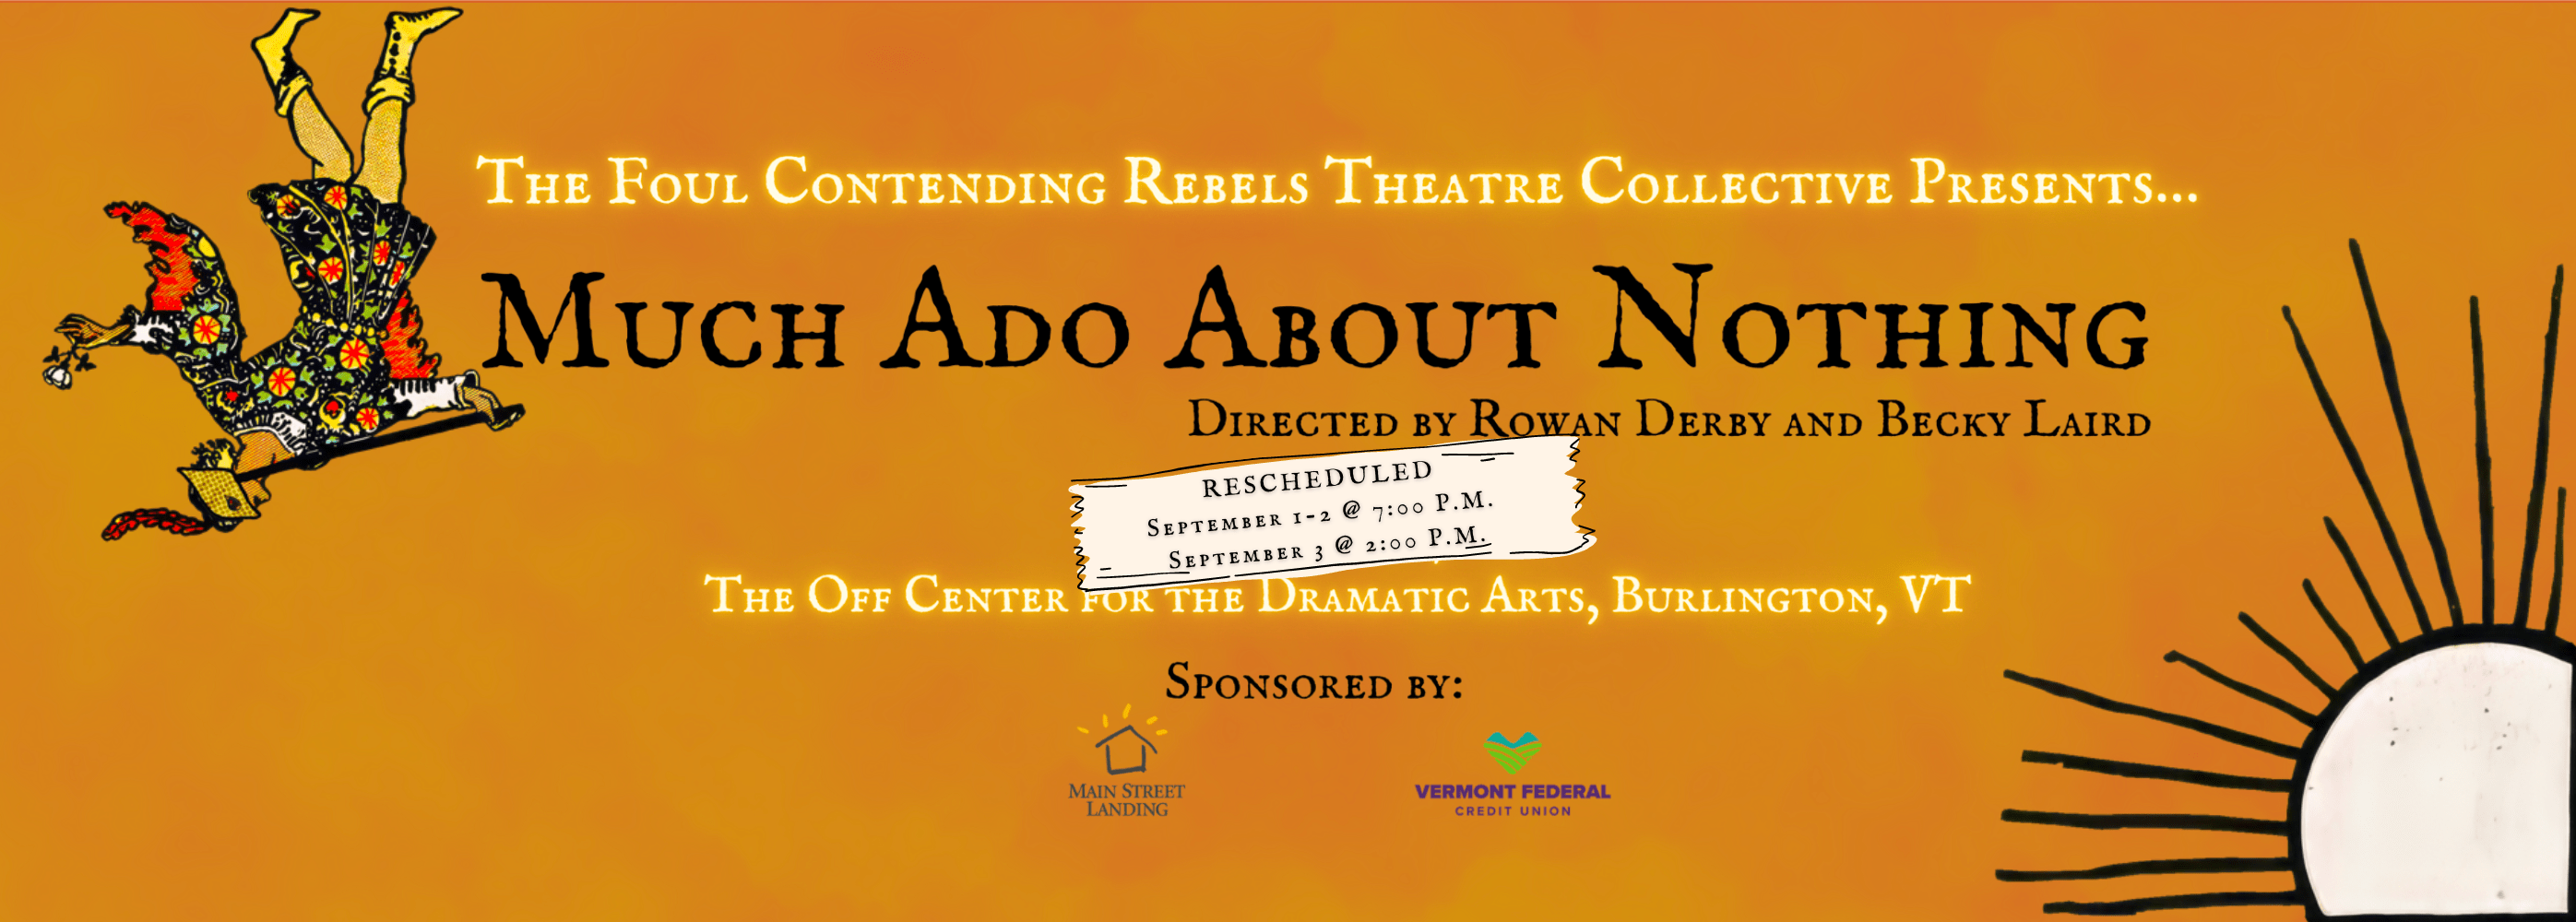 Much Ado about Nothing (Northern Broadsides) @ Derby Theatre - The